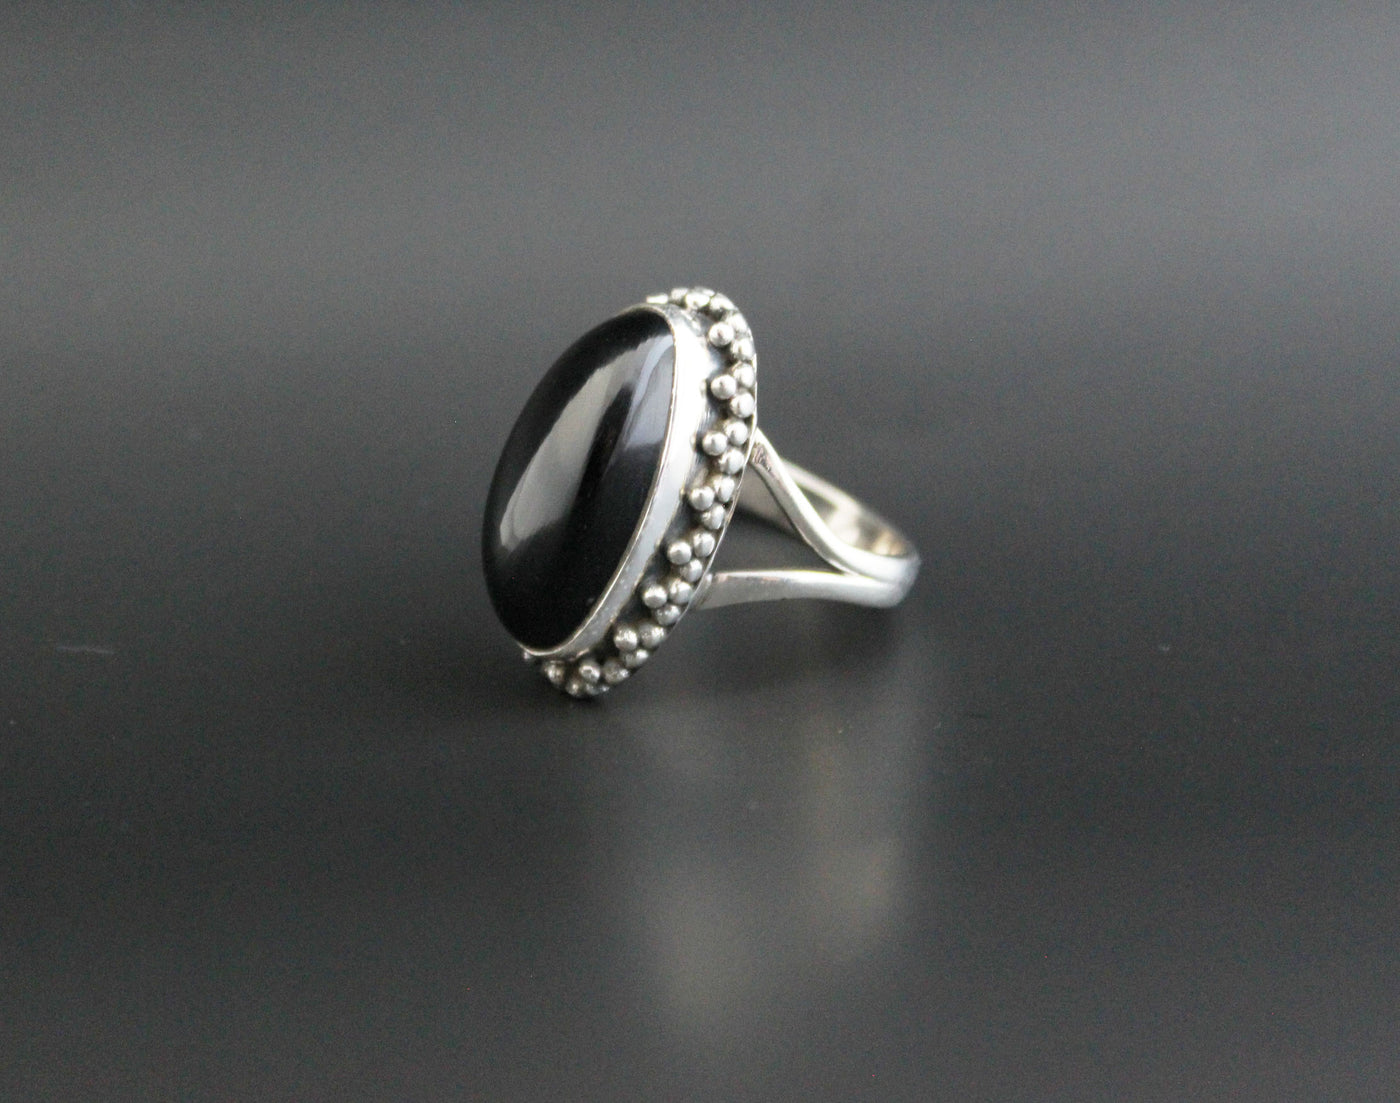 Black Onyx Oval Ring, One of a kind genuine Black Onyx Ring, Sterling Silver Ring, Delicate Stone Ring, Everyday Ring, Customize Rings